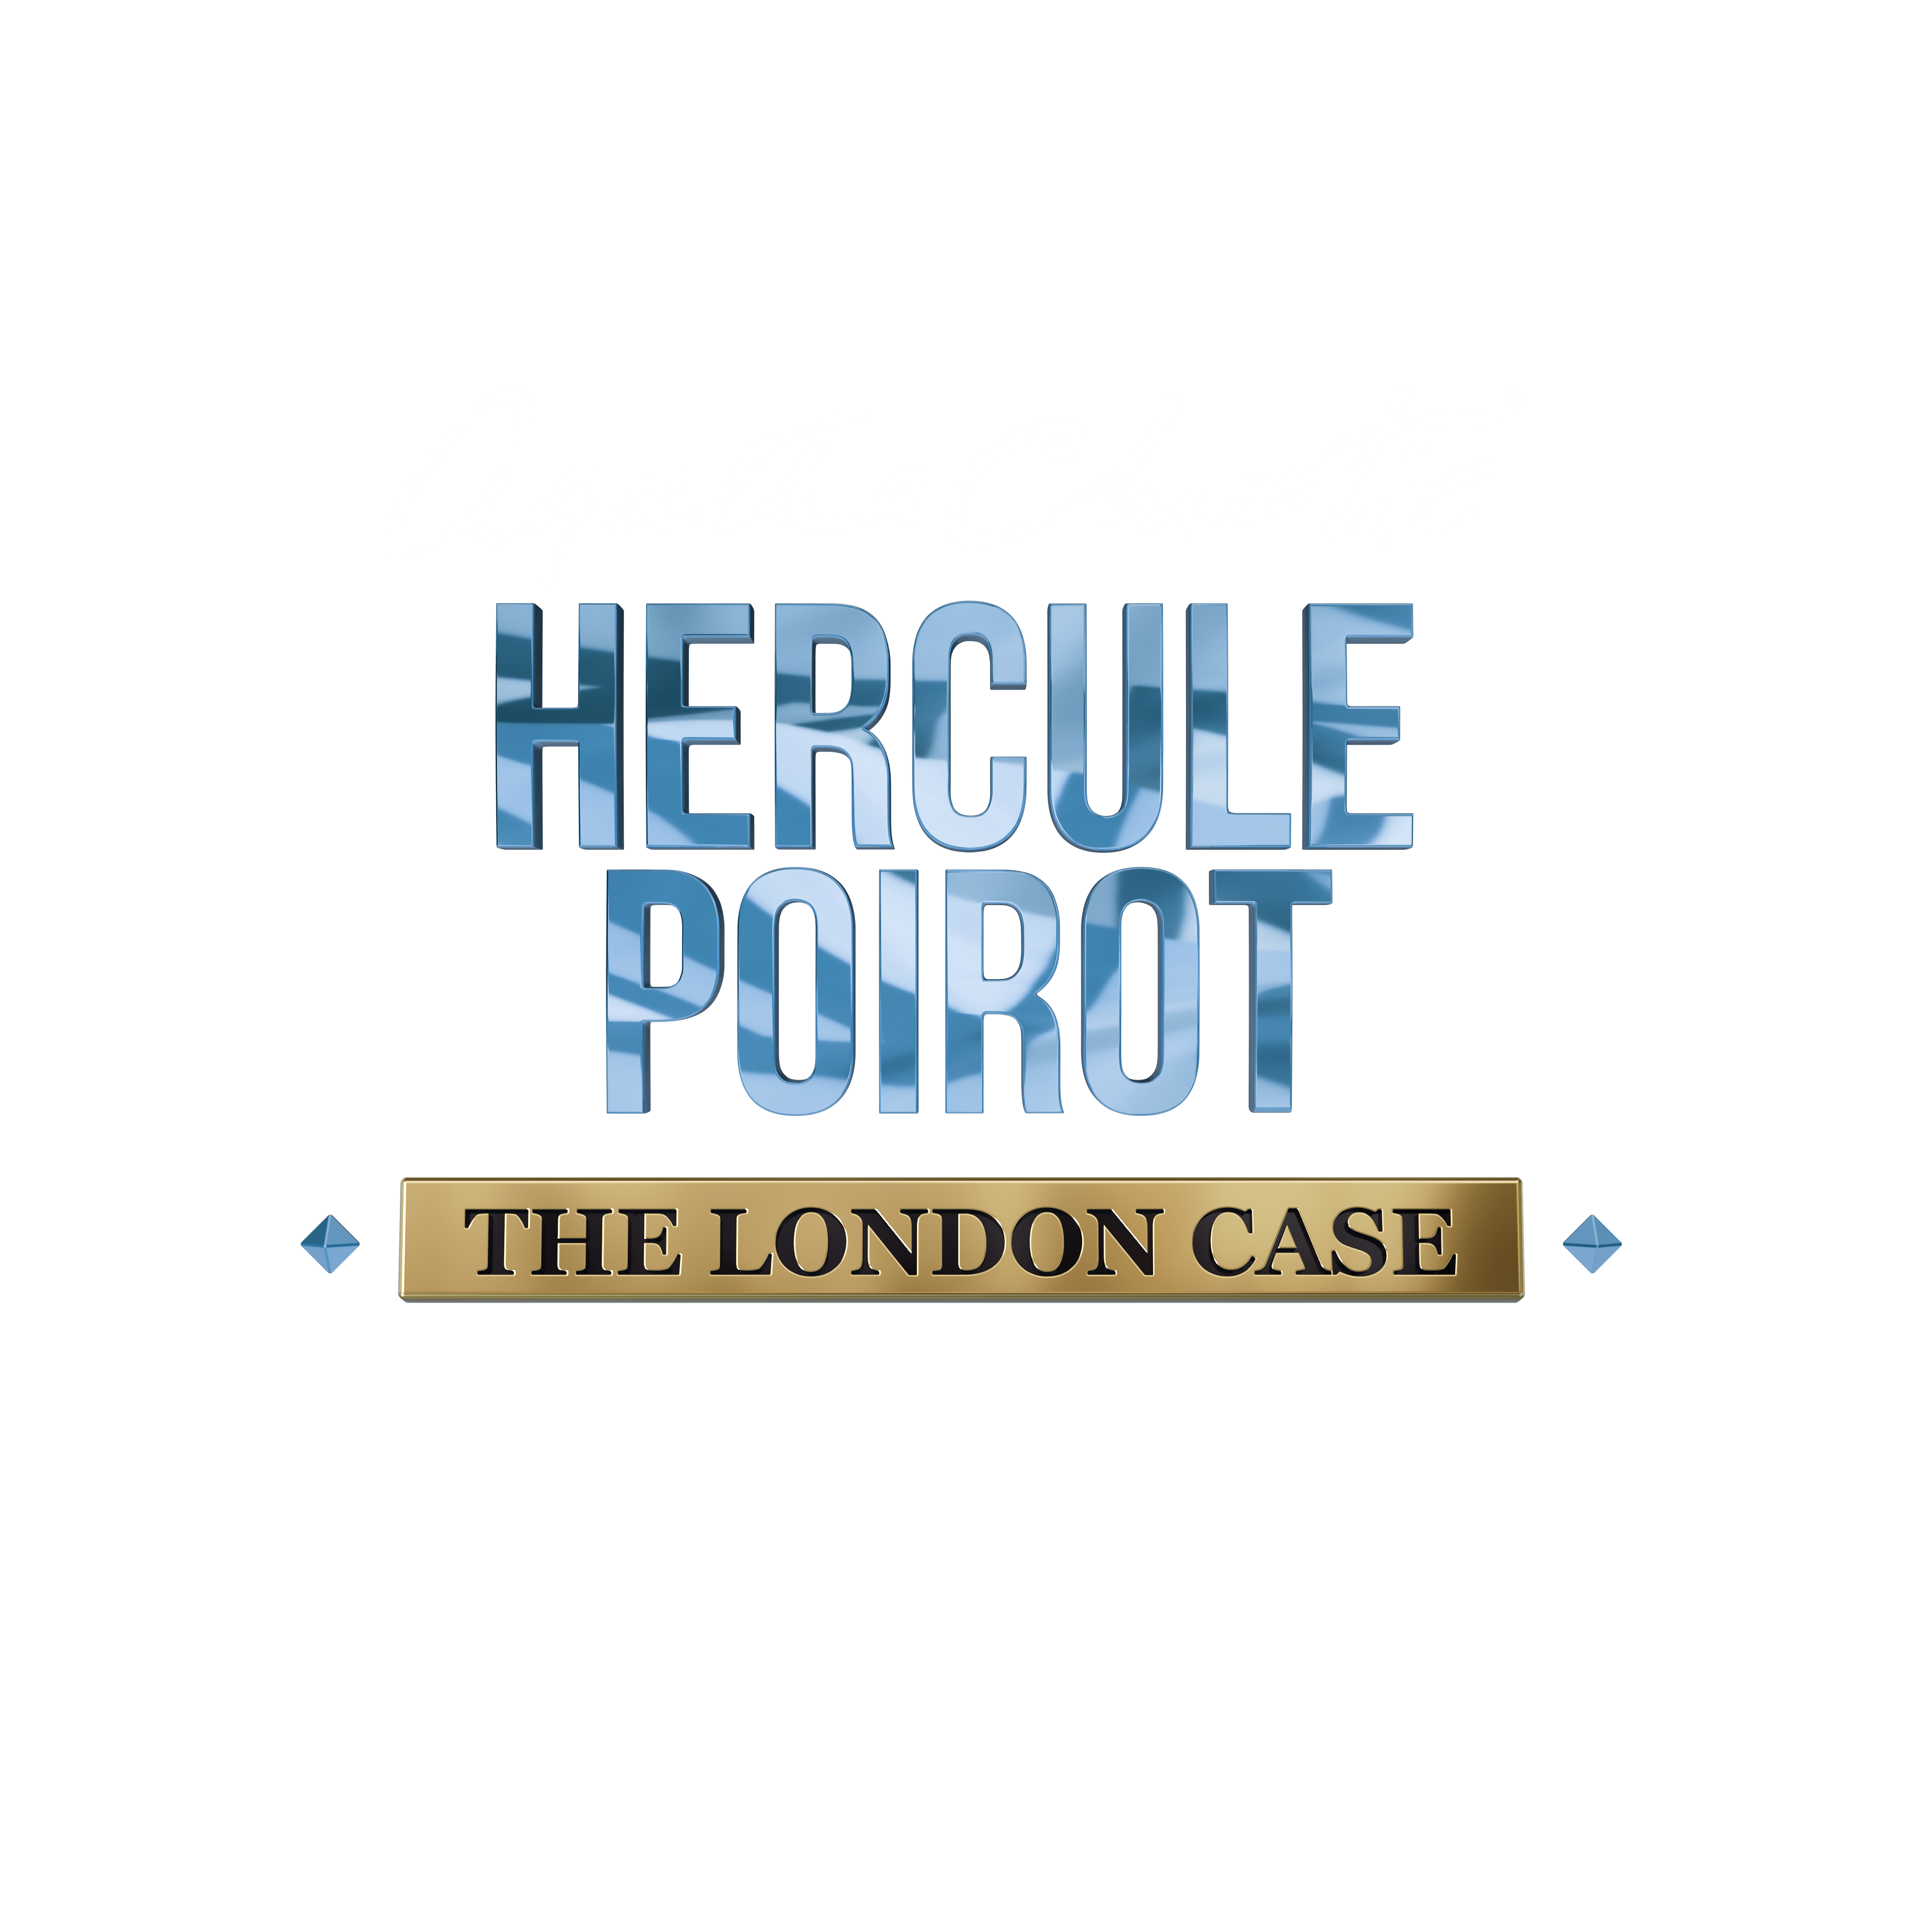 Agatha Christie - Hercule Poirot: Case PS4, Series, Switch, announced PC - The PS5, Gematsu and London Xbox One, for Xbox